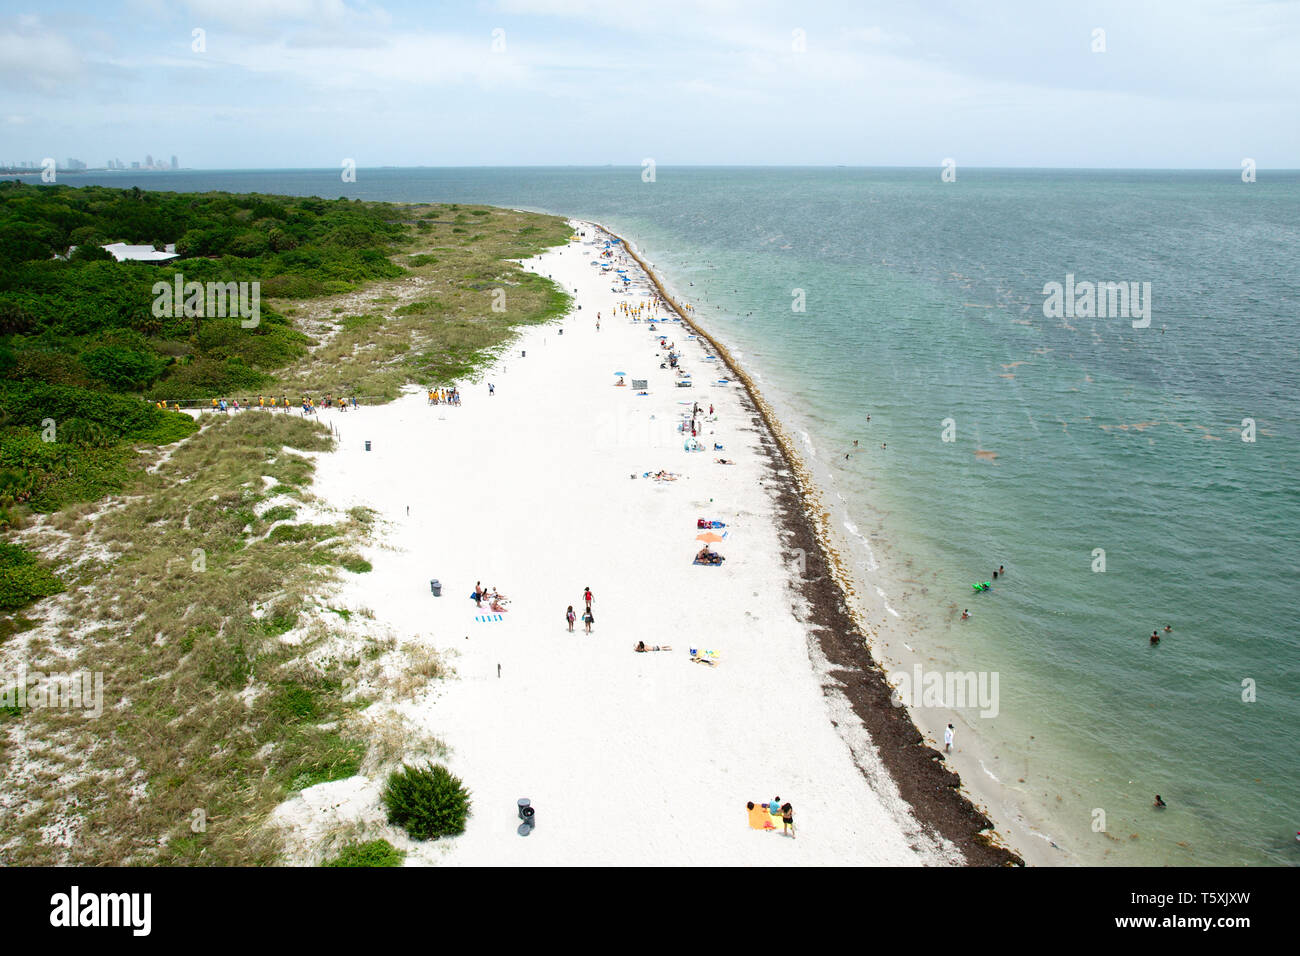 The view from the Cape Florida Light, a lighthouse on Cape Florida at the south end of Key Biscayne in Miami-Dade County, Florida, USA. Stock Photo